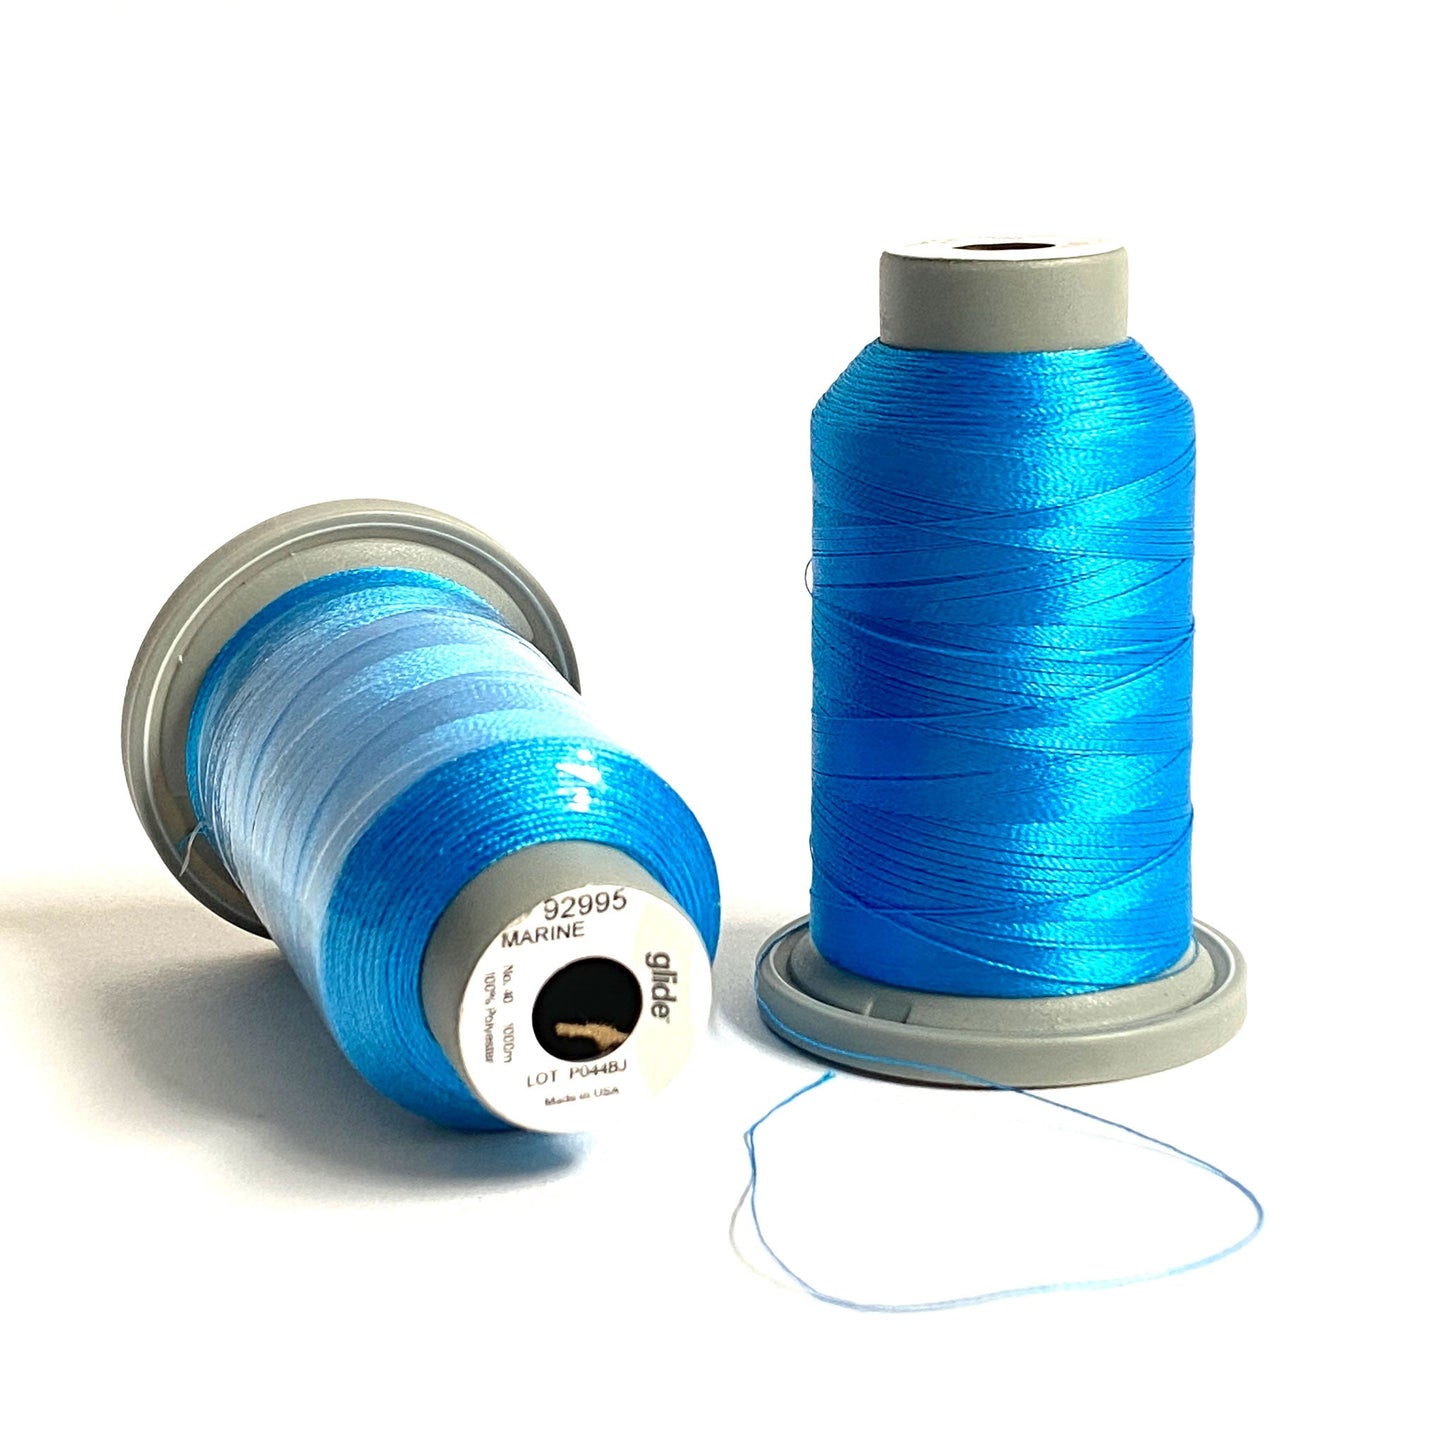 Glide 40 wt. Trilobal polyester thread by Fil-Tec has a light sheen and superior strength for embroidery and thread-painting. Marine (92995) is a rich shade of blue, reminiscent of the clear blue skies over the ocean. Stitcher's Joy